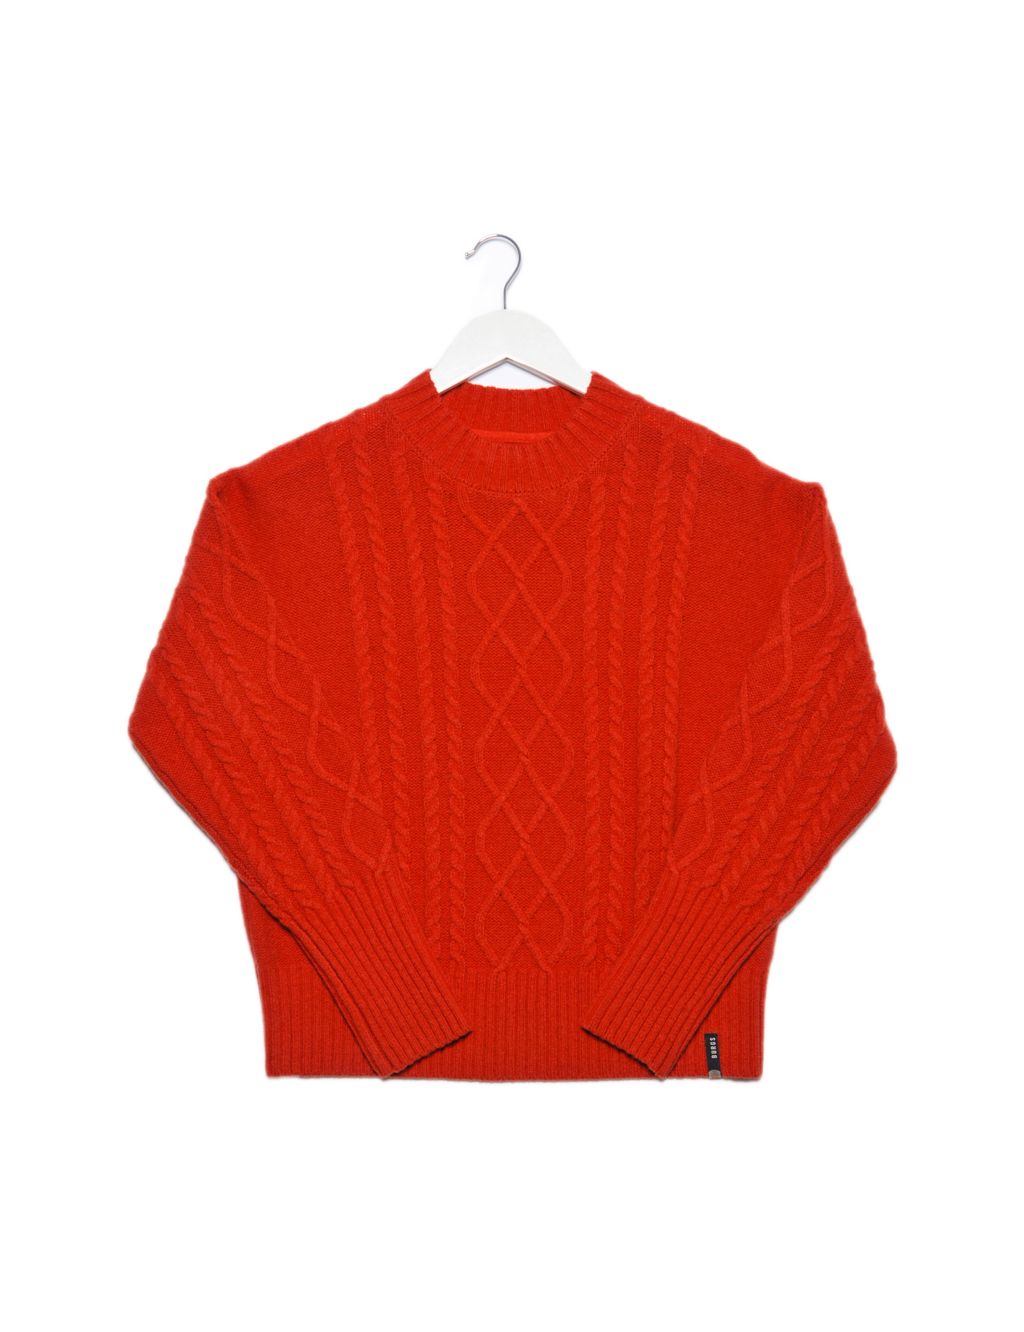 Pure Wool Cable Knit Crew Neck Jumper image 2